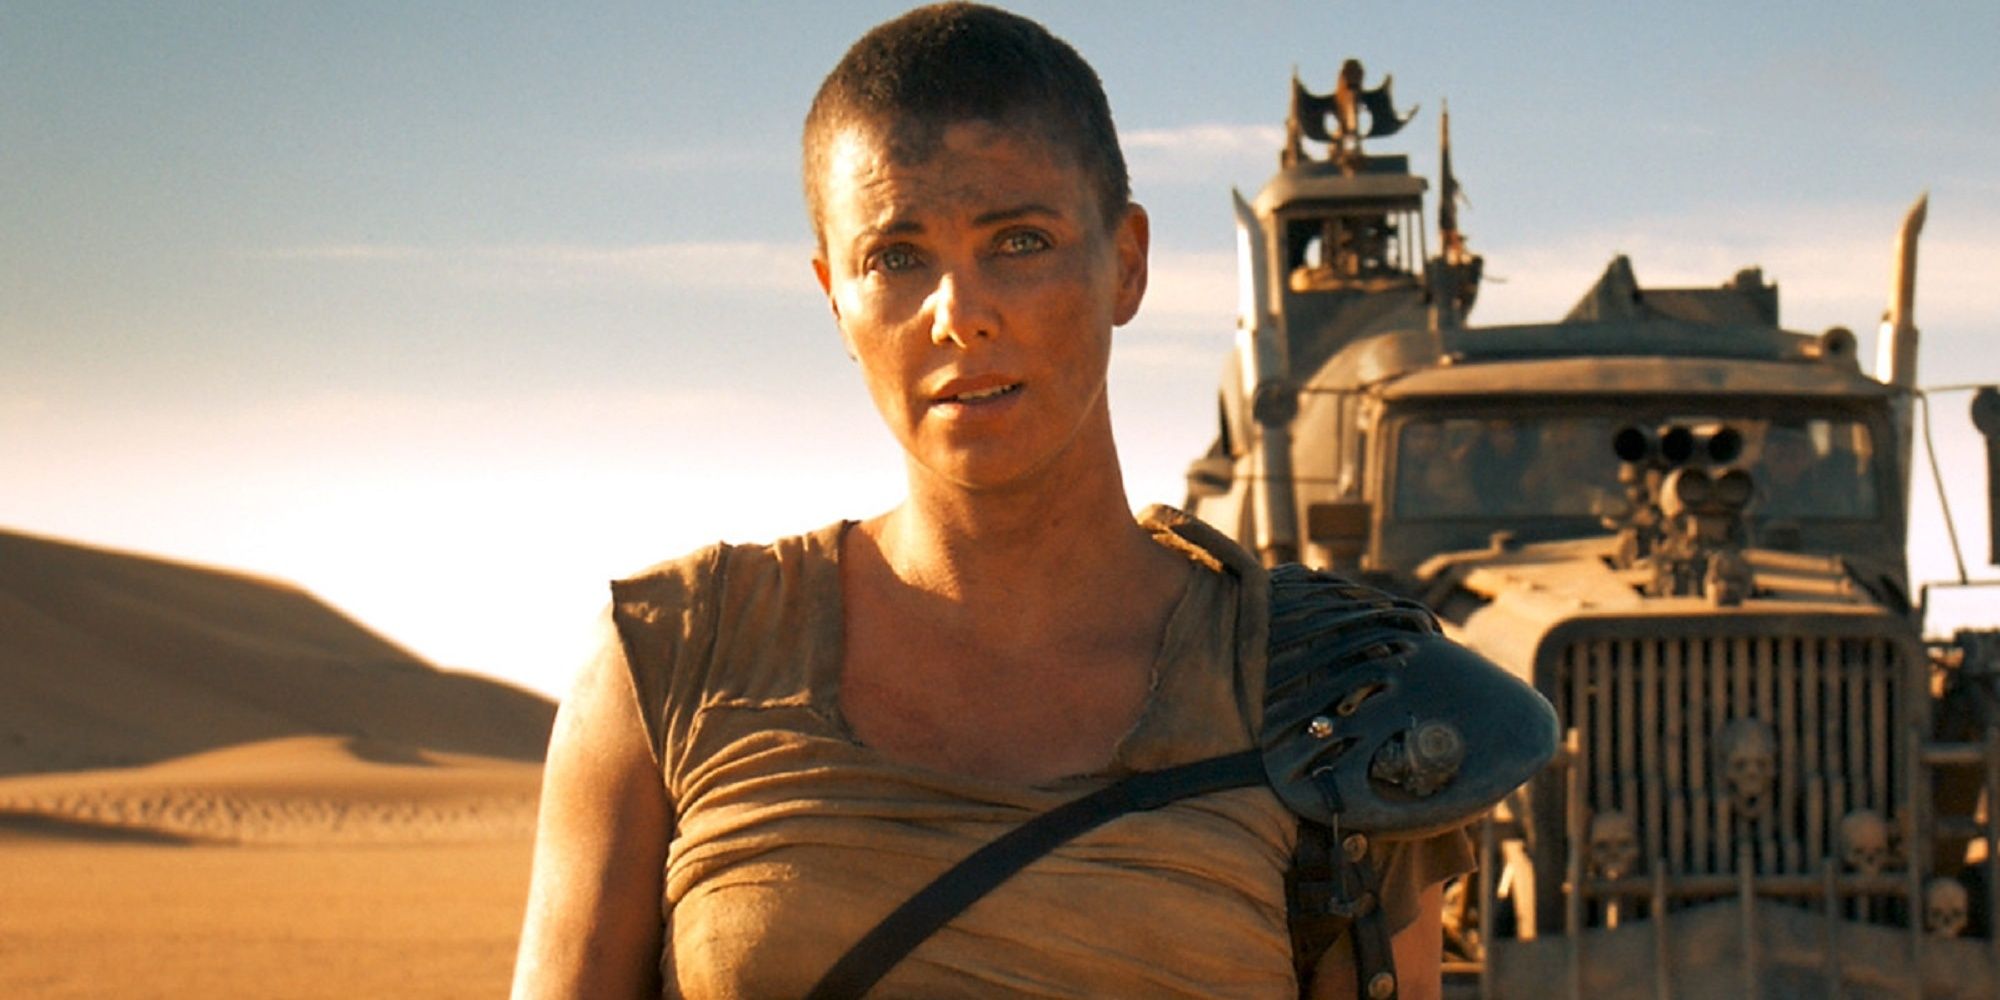 Imperator Furiosa in front of her war rig in Mad Max: Fury Road.